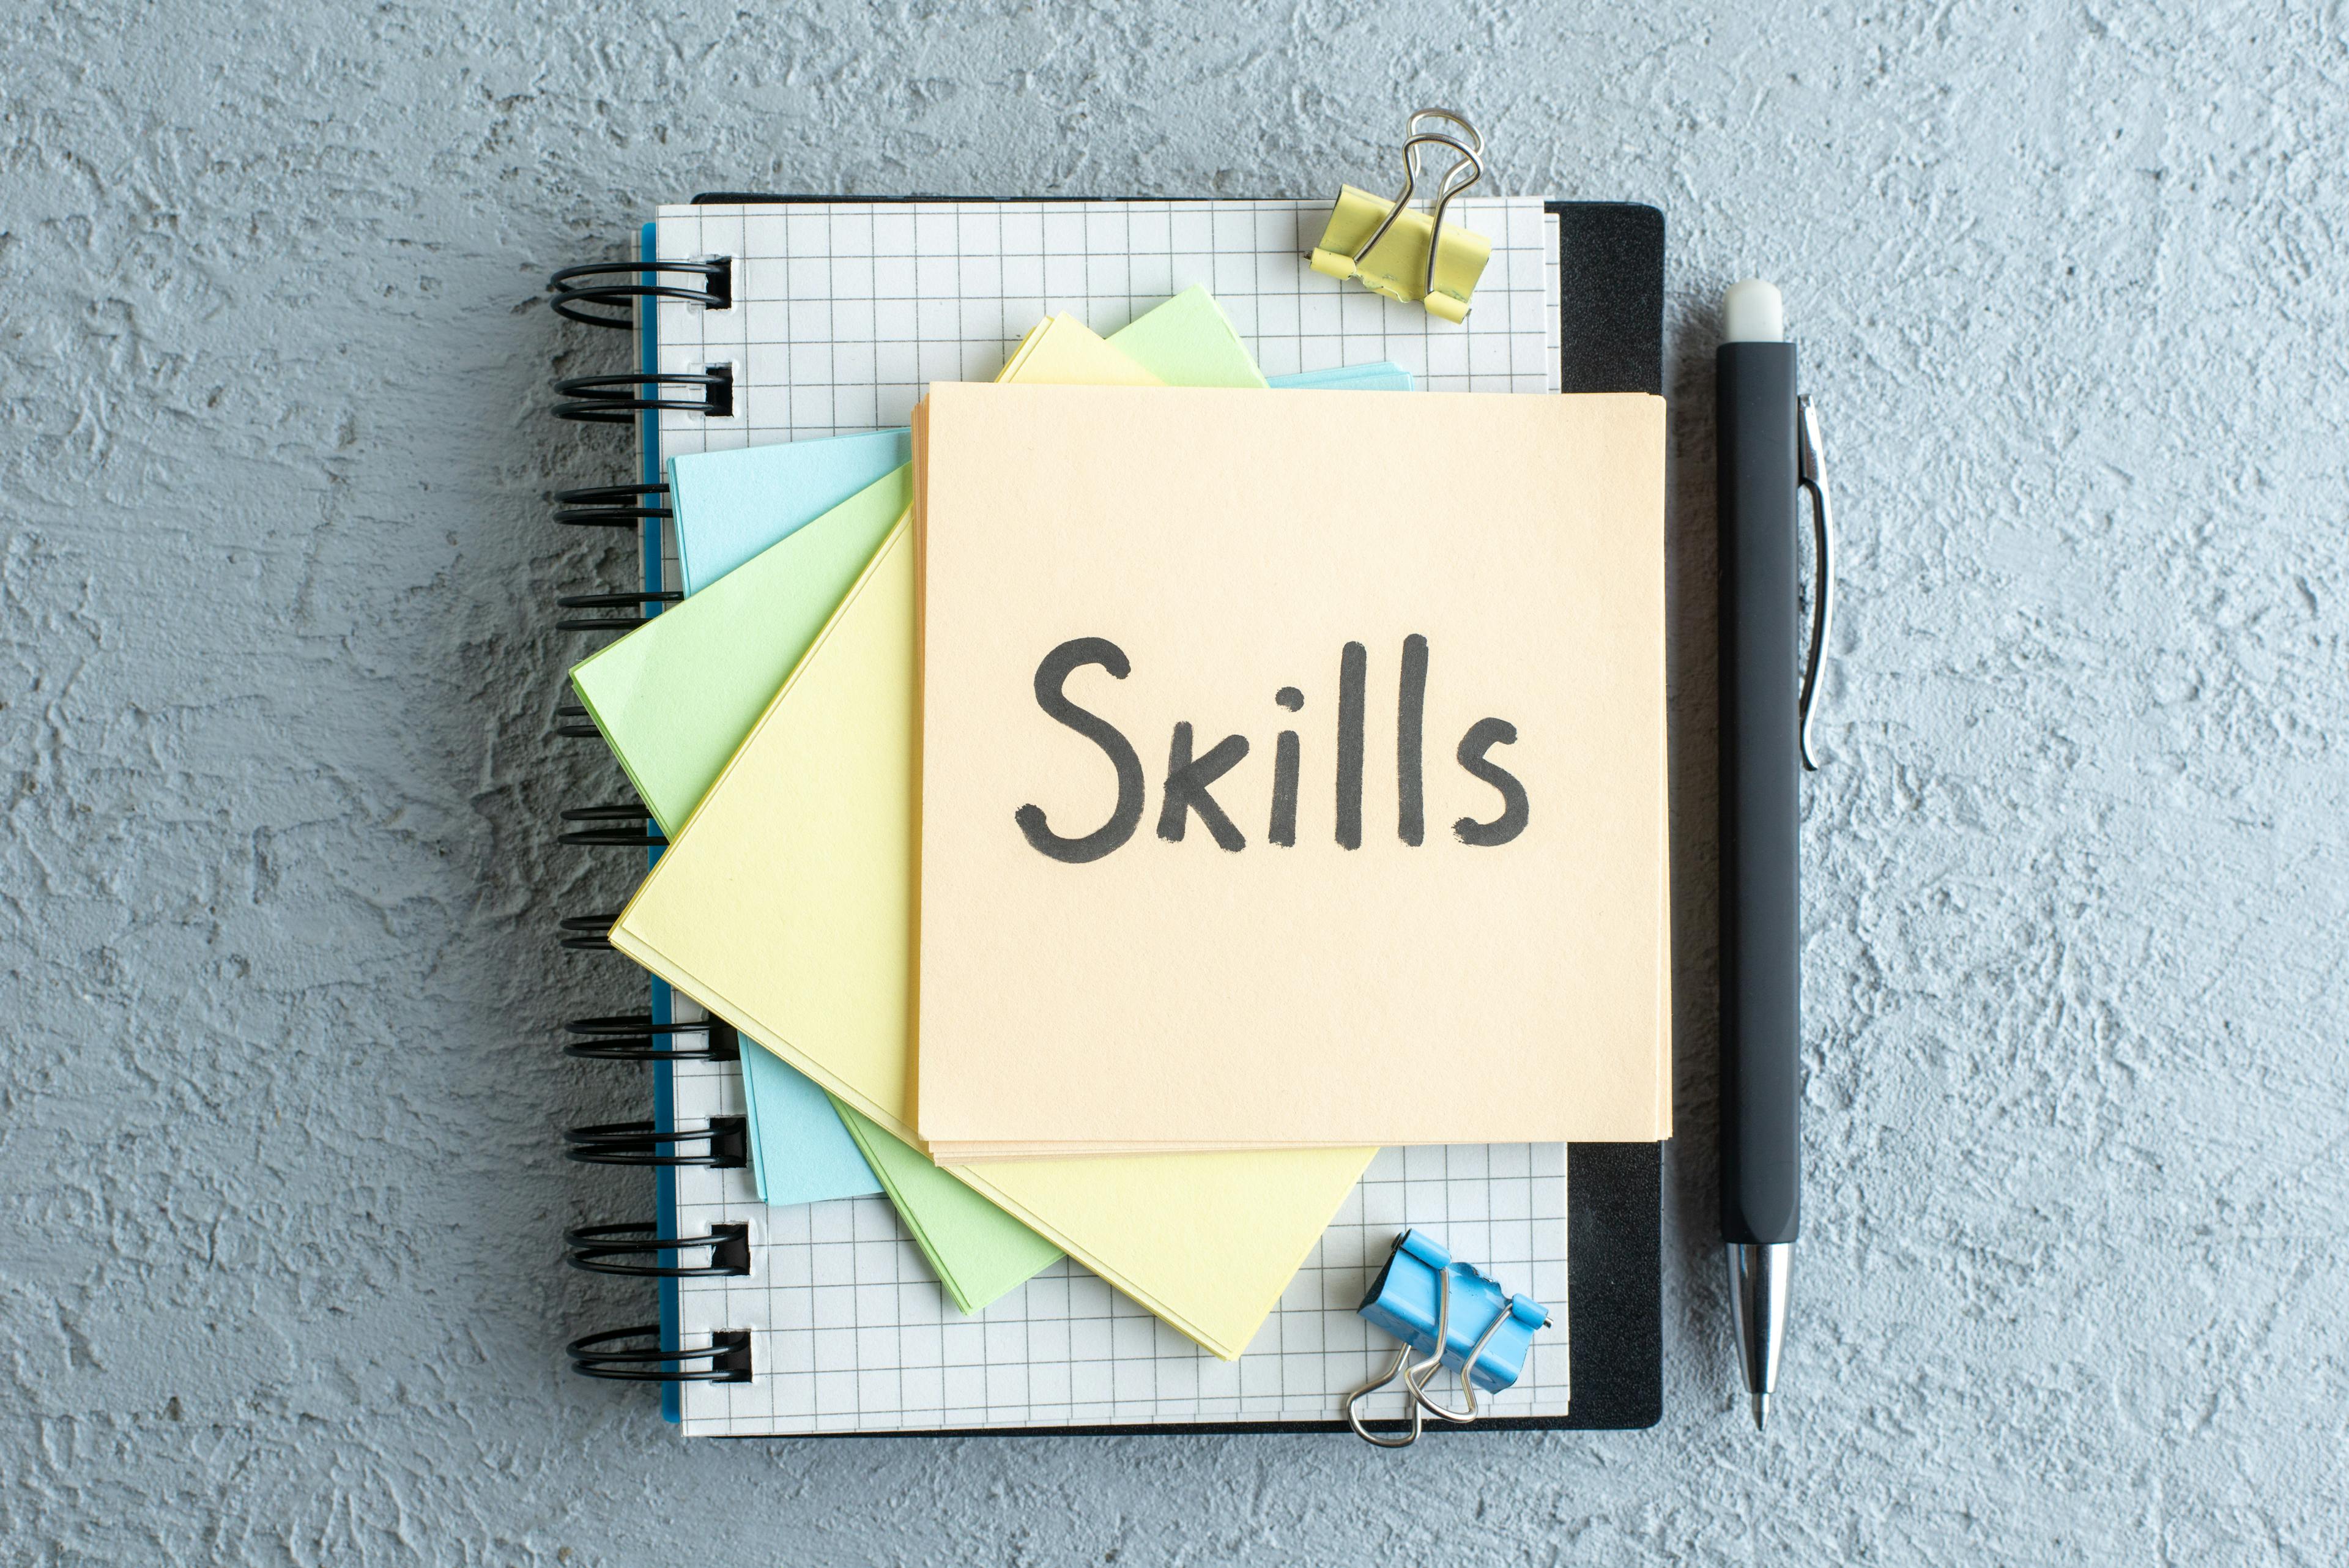 The Top 5 Skills in Today's World